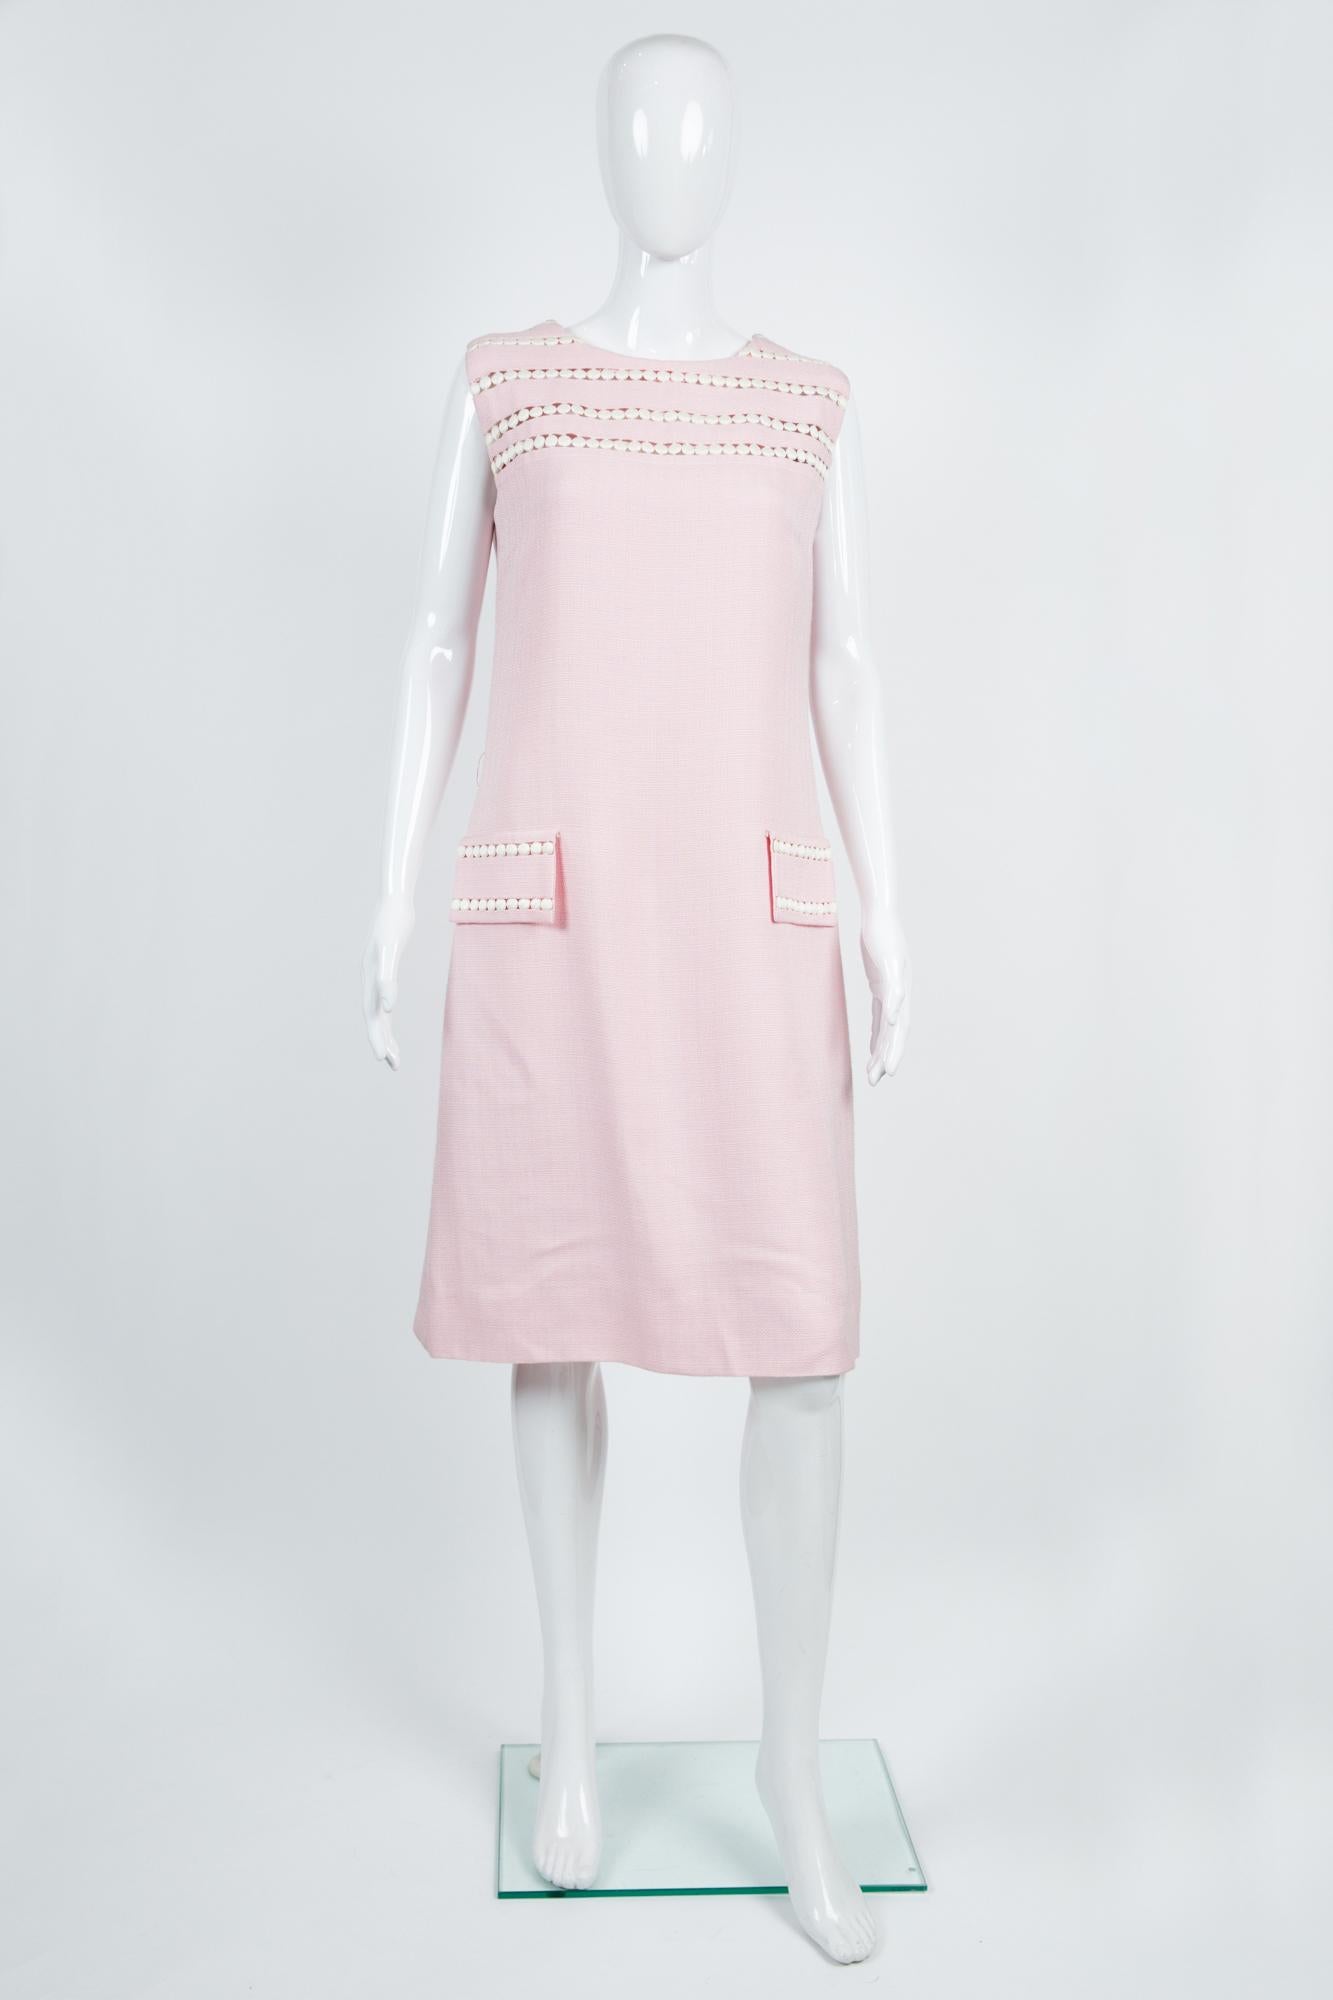 Maggy Rouff pink silk dress featuring a white ribbon detail, a center back zip opening, a silk lining. 
Label: Maggy Rouff - 14 Avenue Montaigne Paris, circa 1968/1970
Estimated size 40fr/US8/UK12
In good vintage condition
We guarantee you will